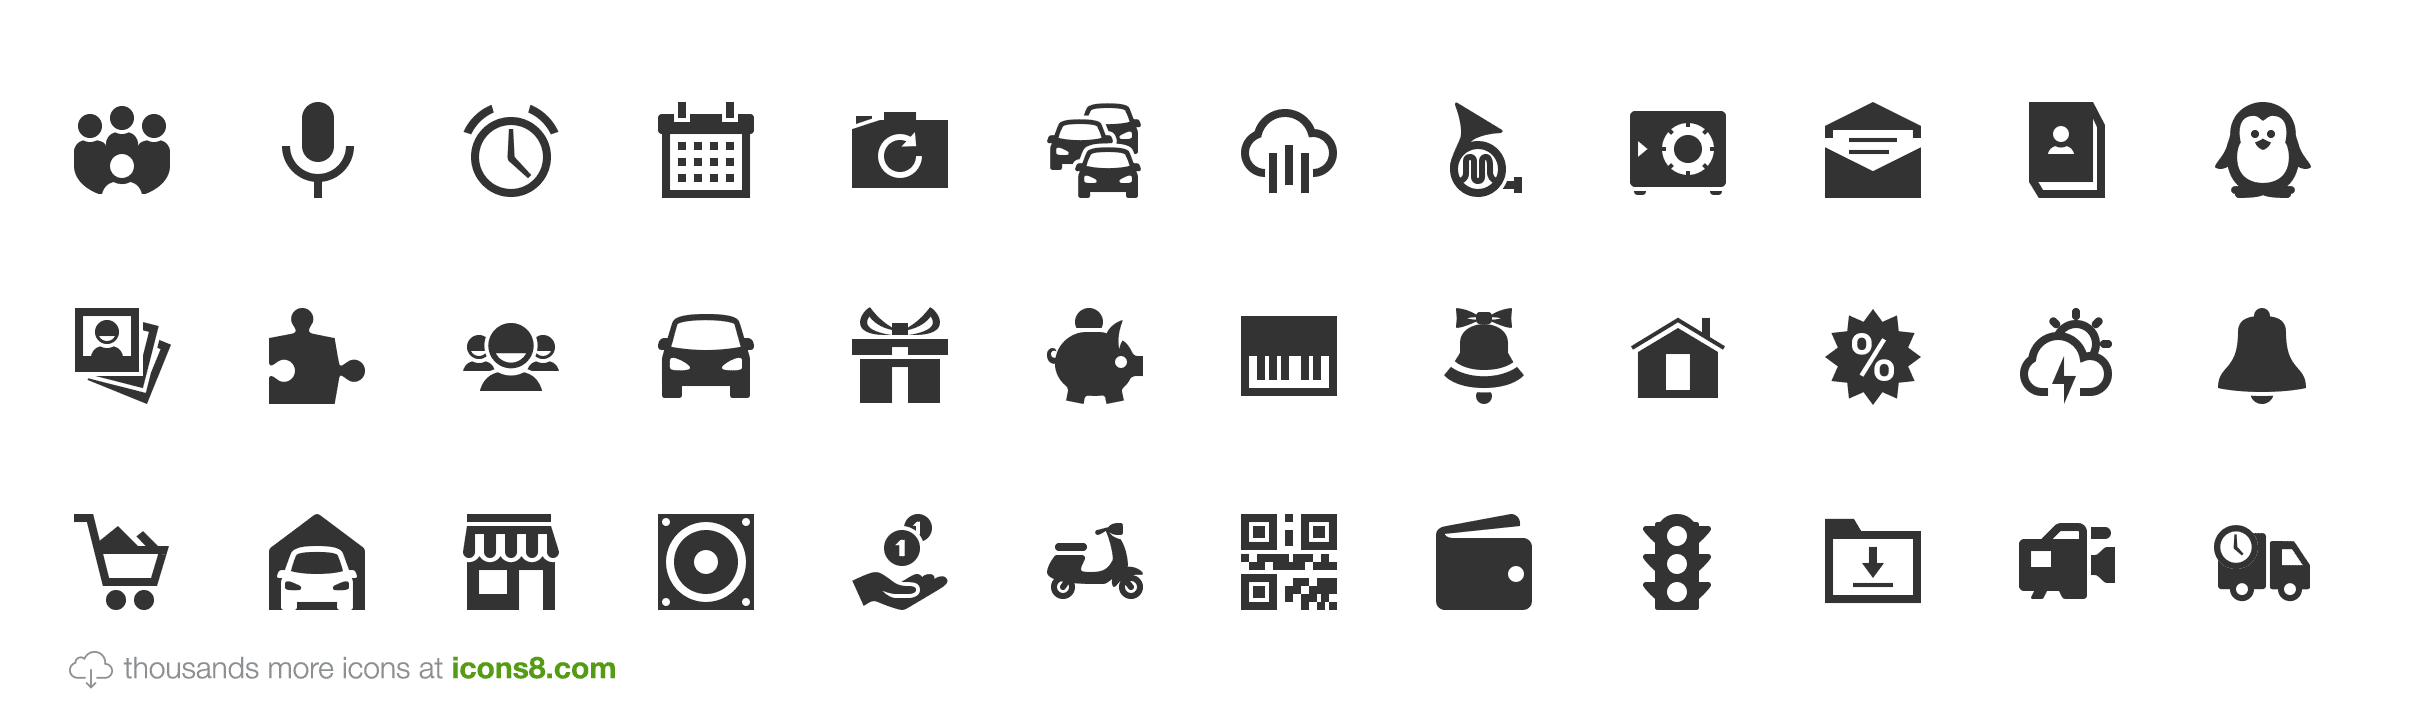 350+ Free Android Icons